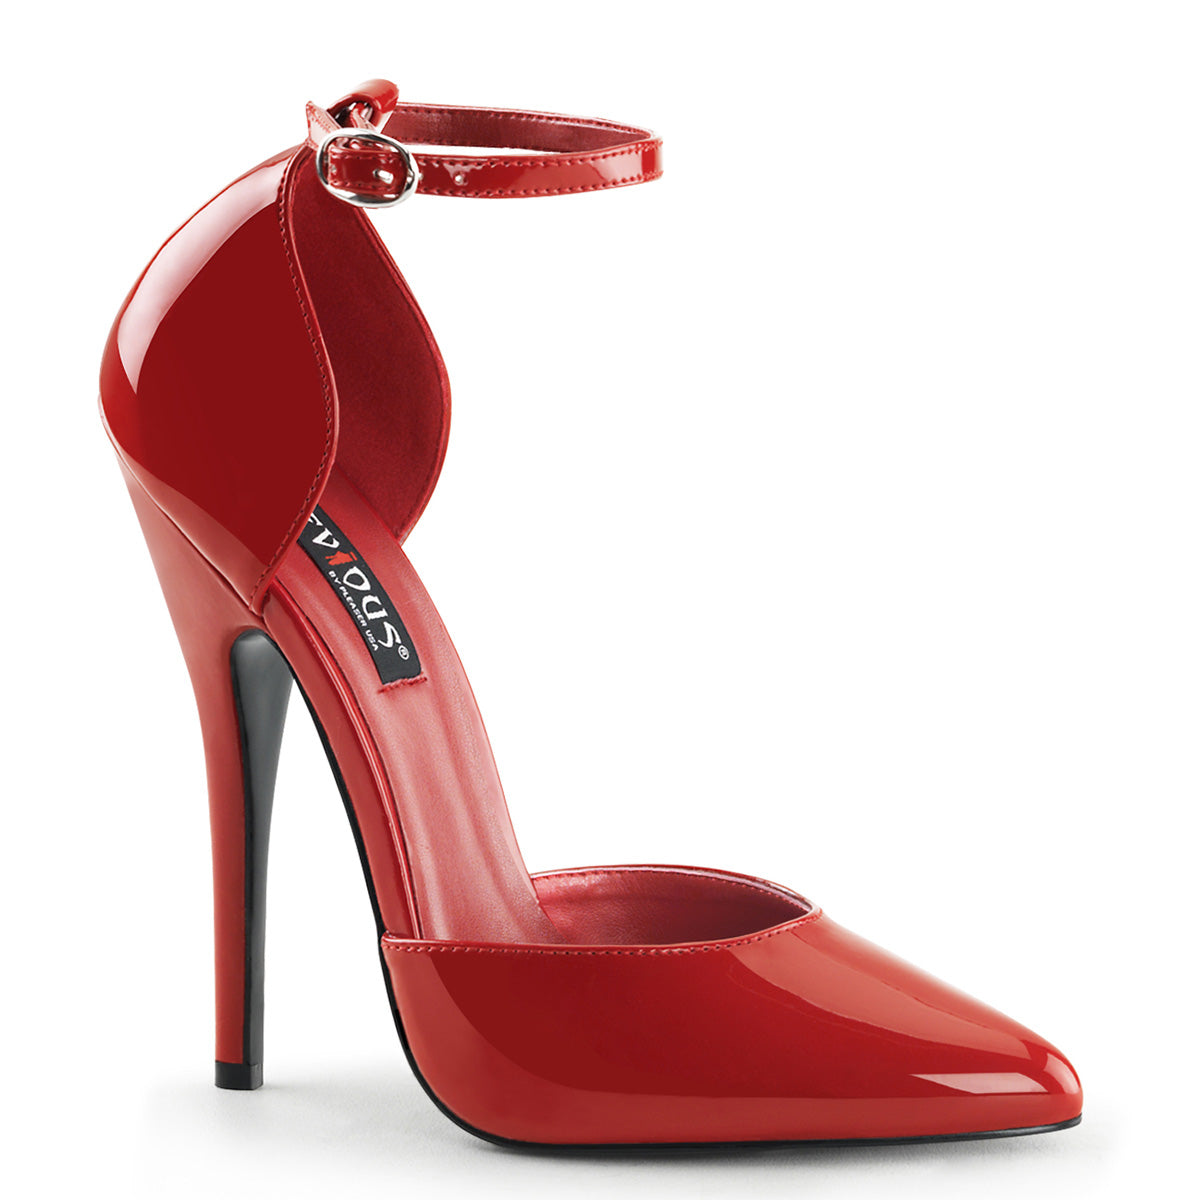 DOMINA-402 Devious Fetish Footwear 6 Inch Heel Red Shoes